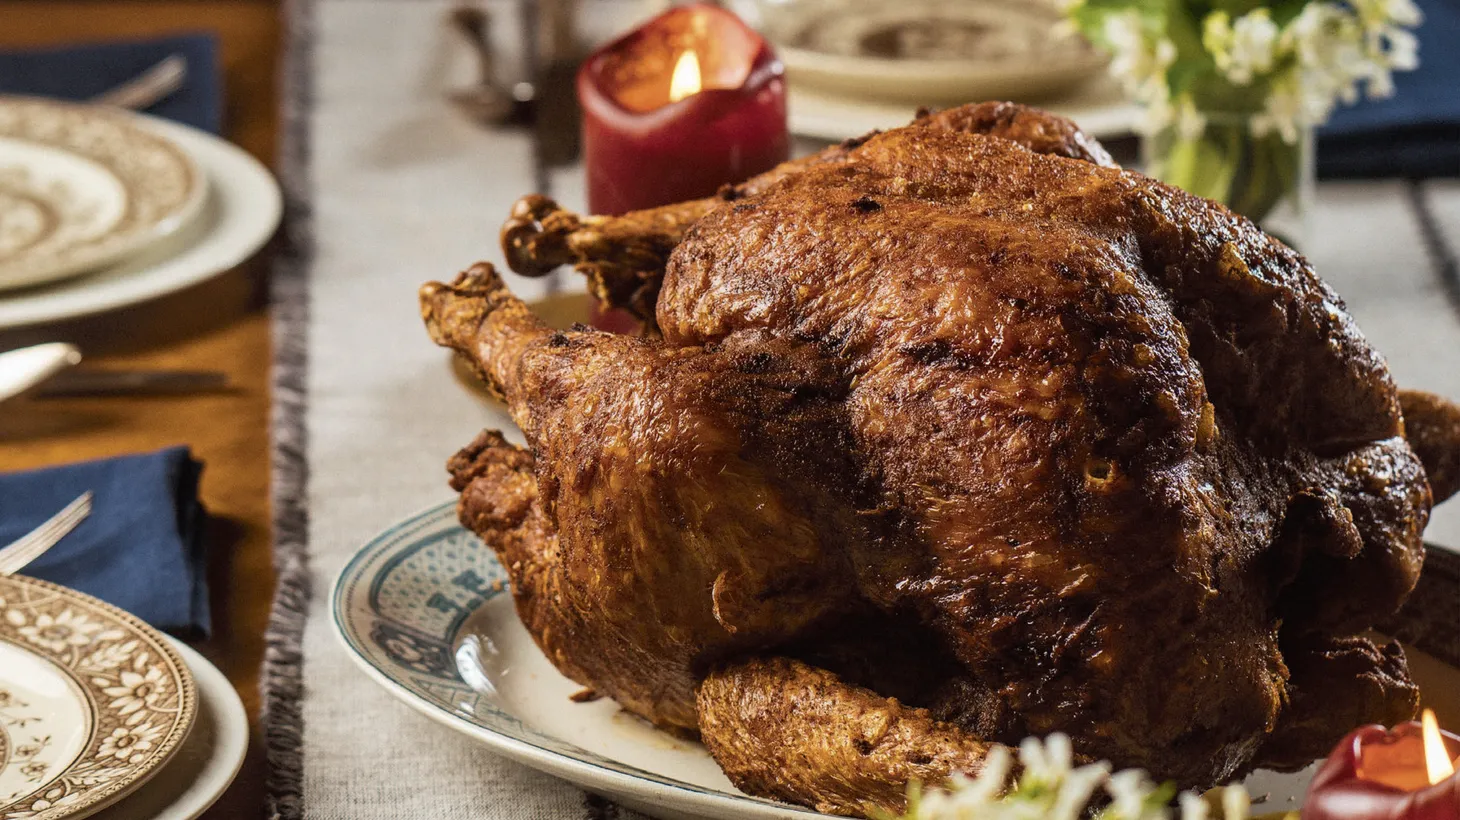 “My granny was frying turkeys in a big ol’ witches brew cast-iron pot like she used to fry her fish in way back in the day,” says pitmaster Kevin Bludso.